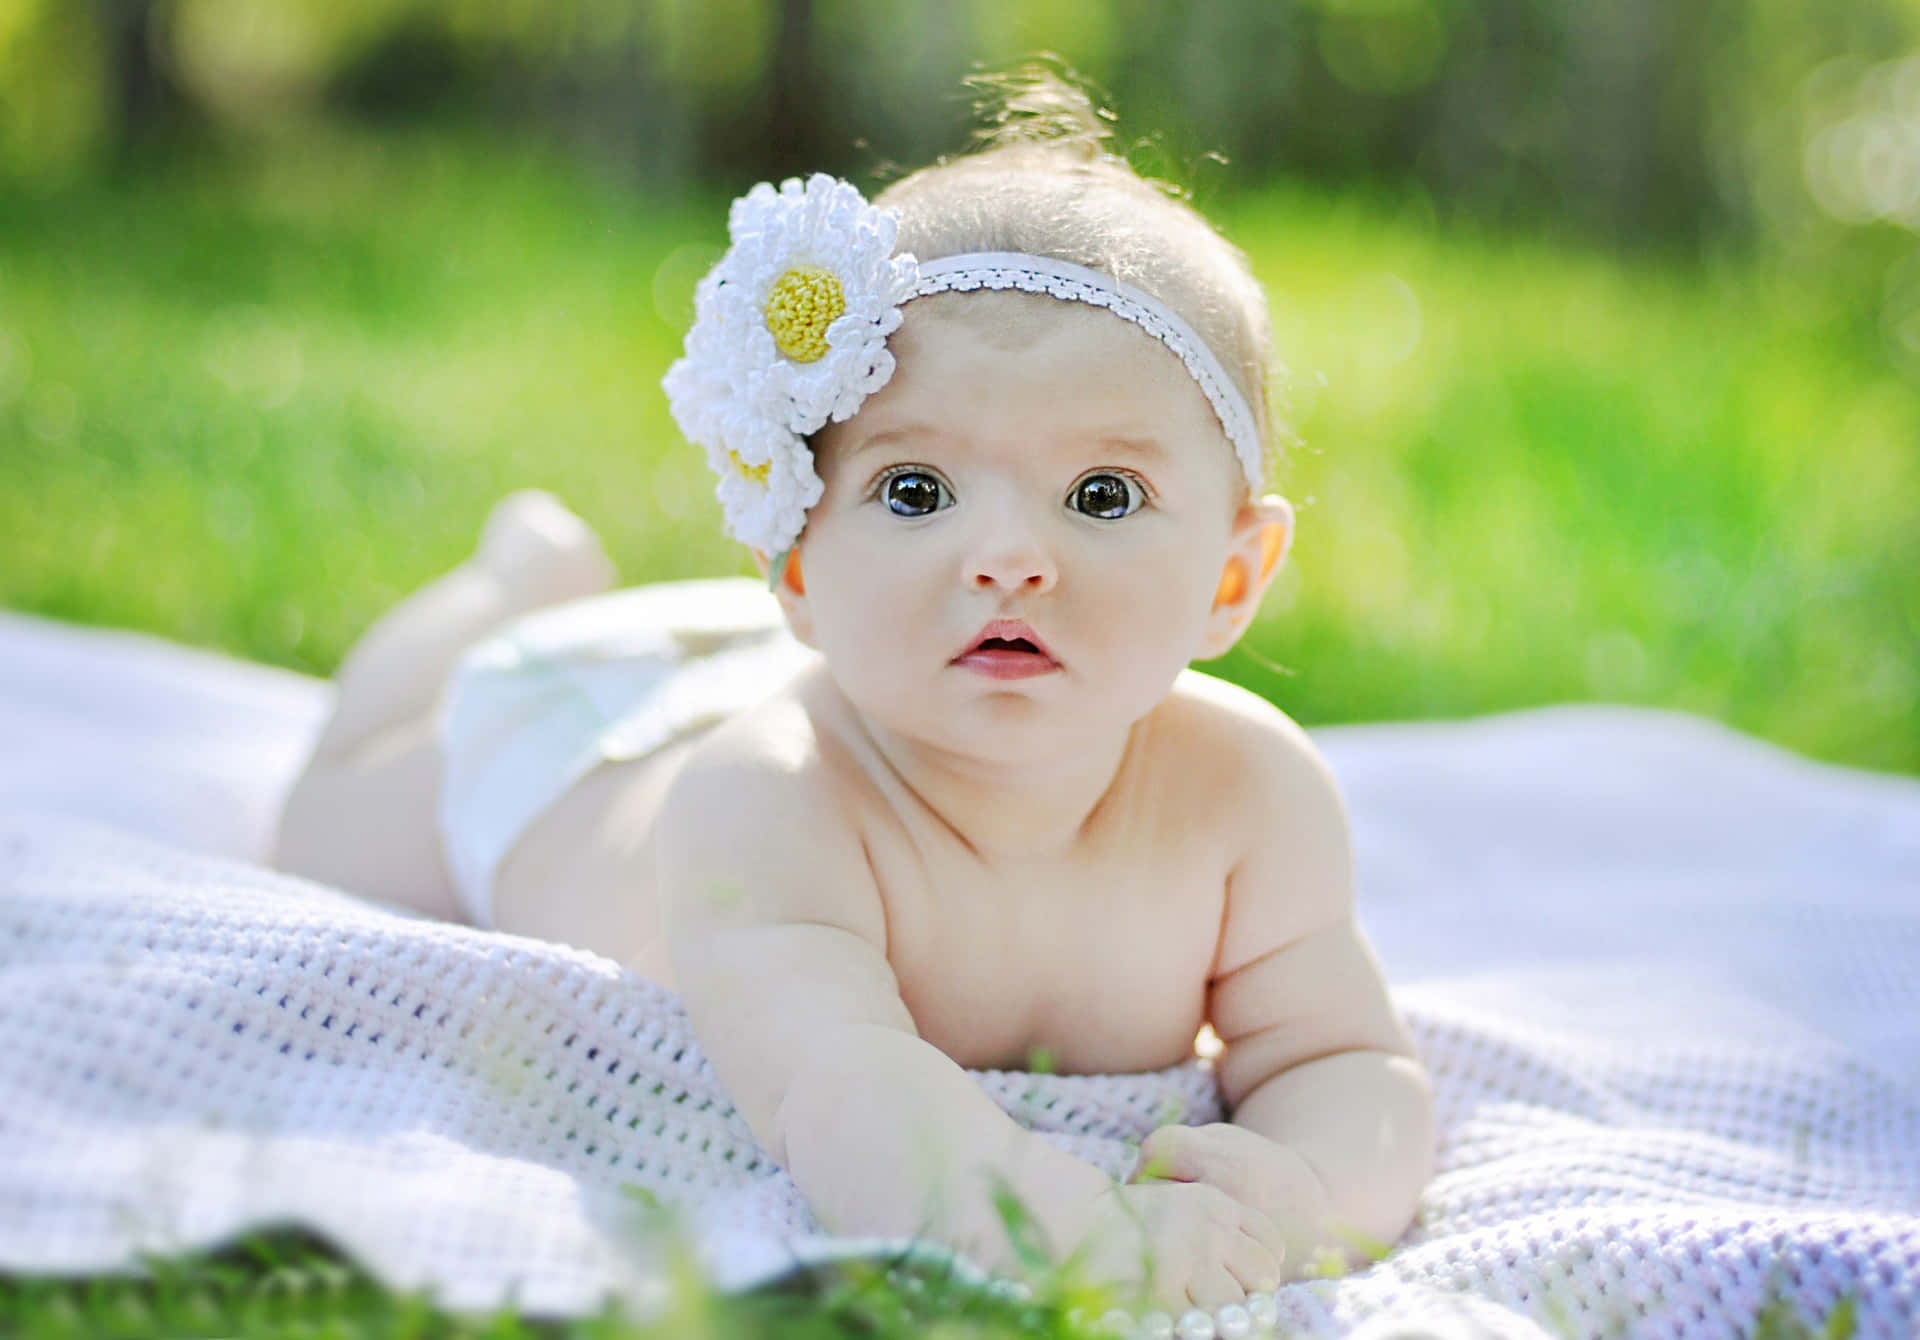 A Baby Girl Laying On The Grass With A Flower Headband